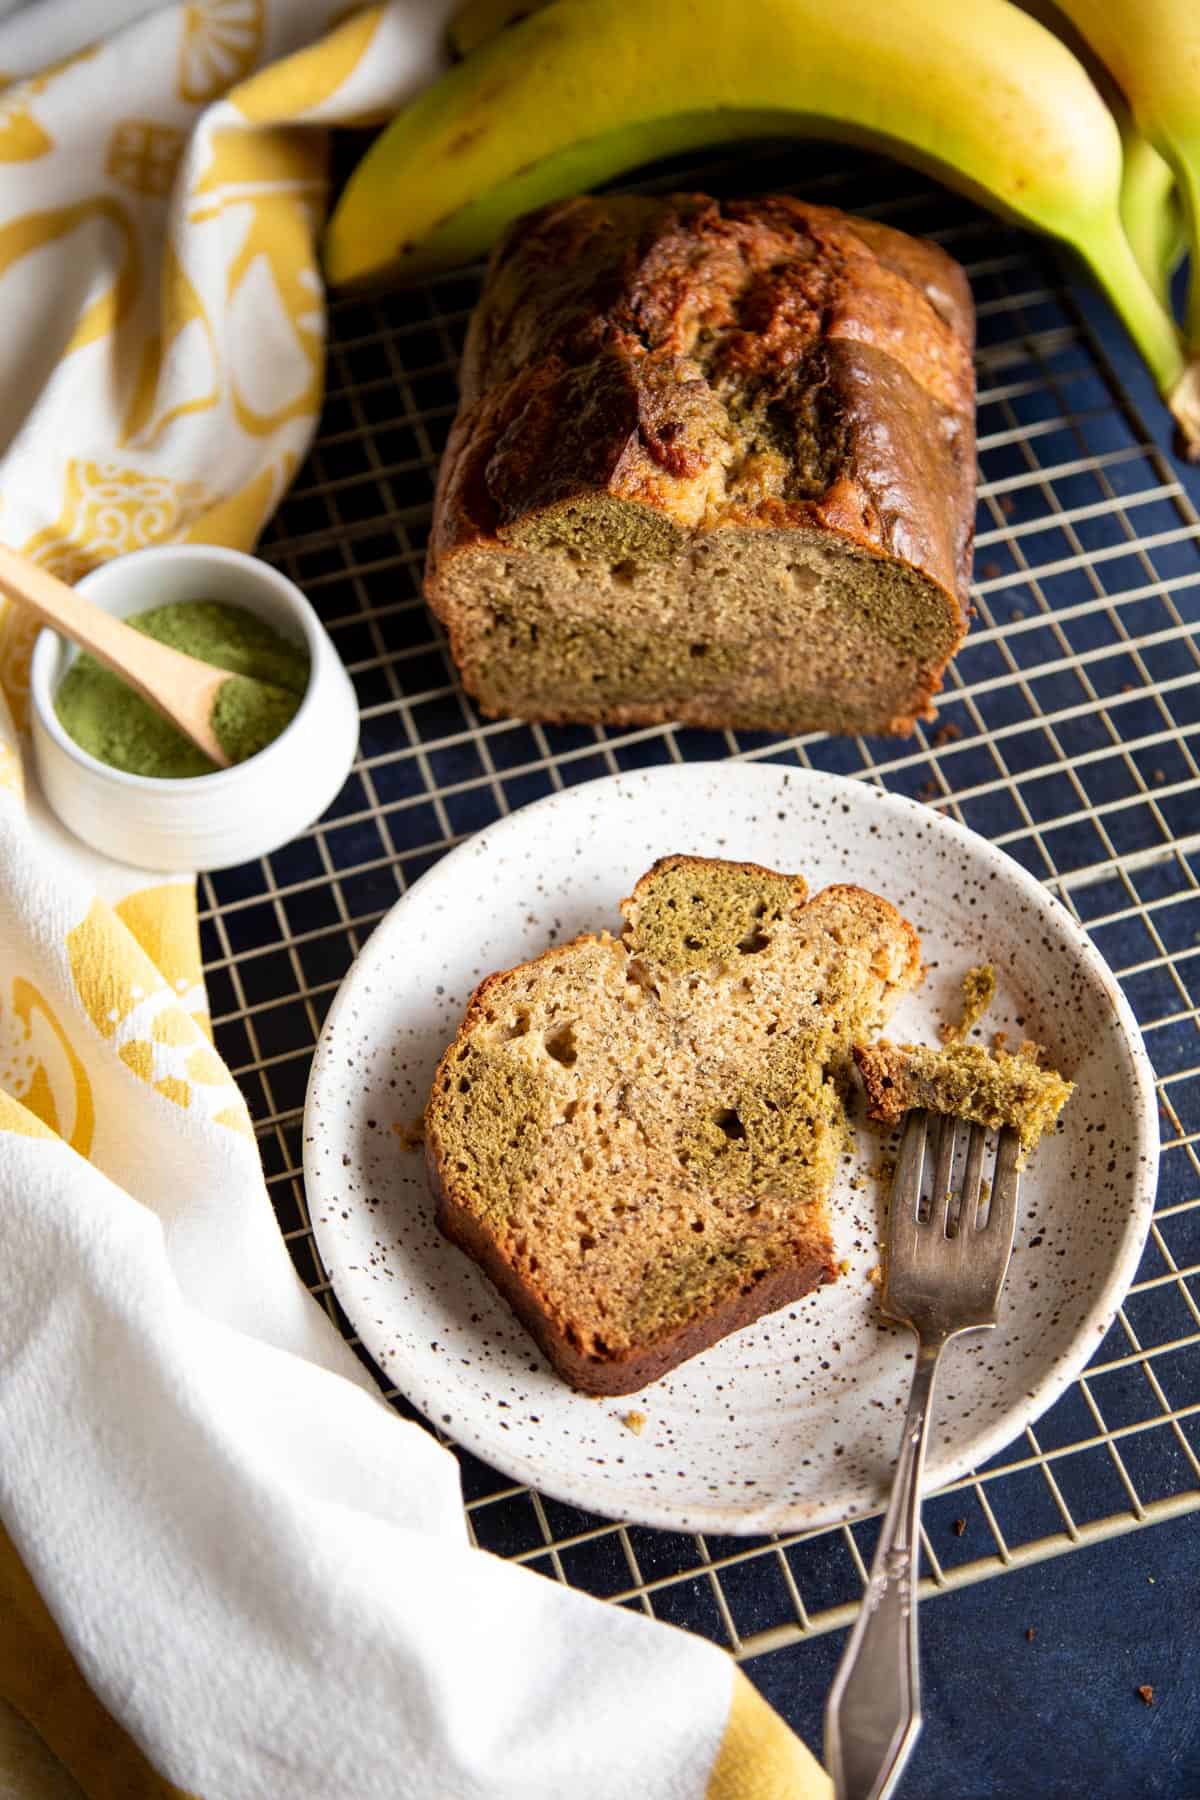 A slice of matcha banana bread on a plate next to half a loaf.